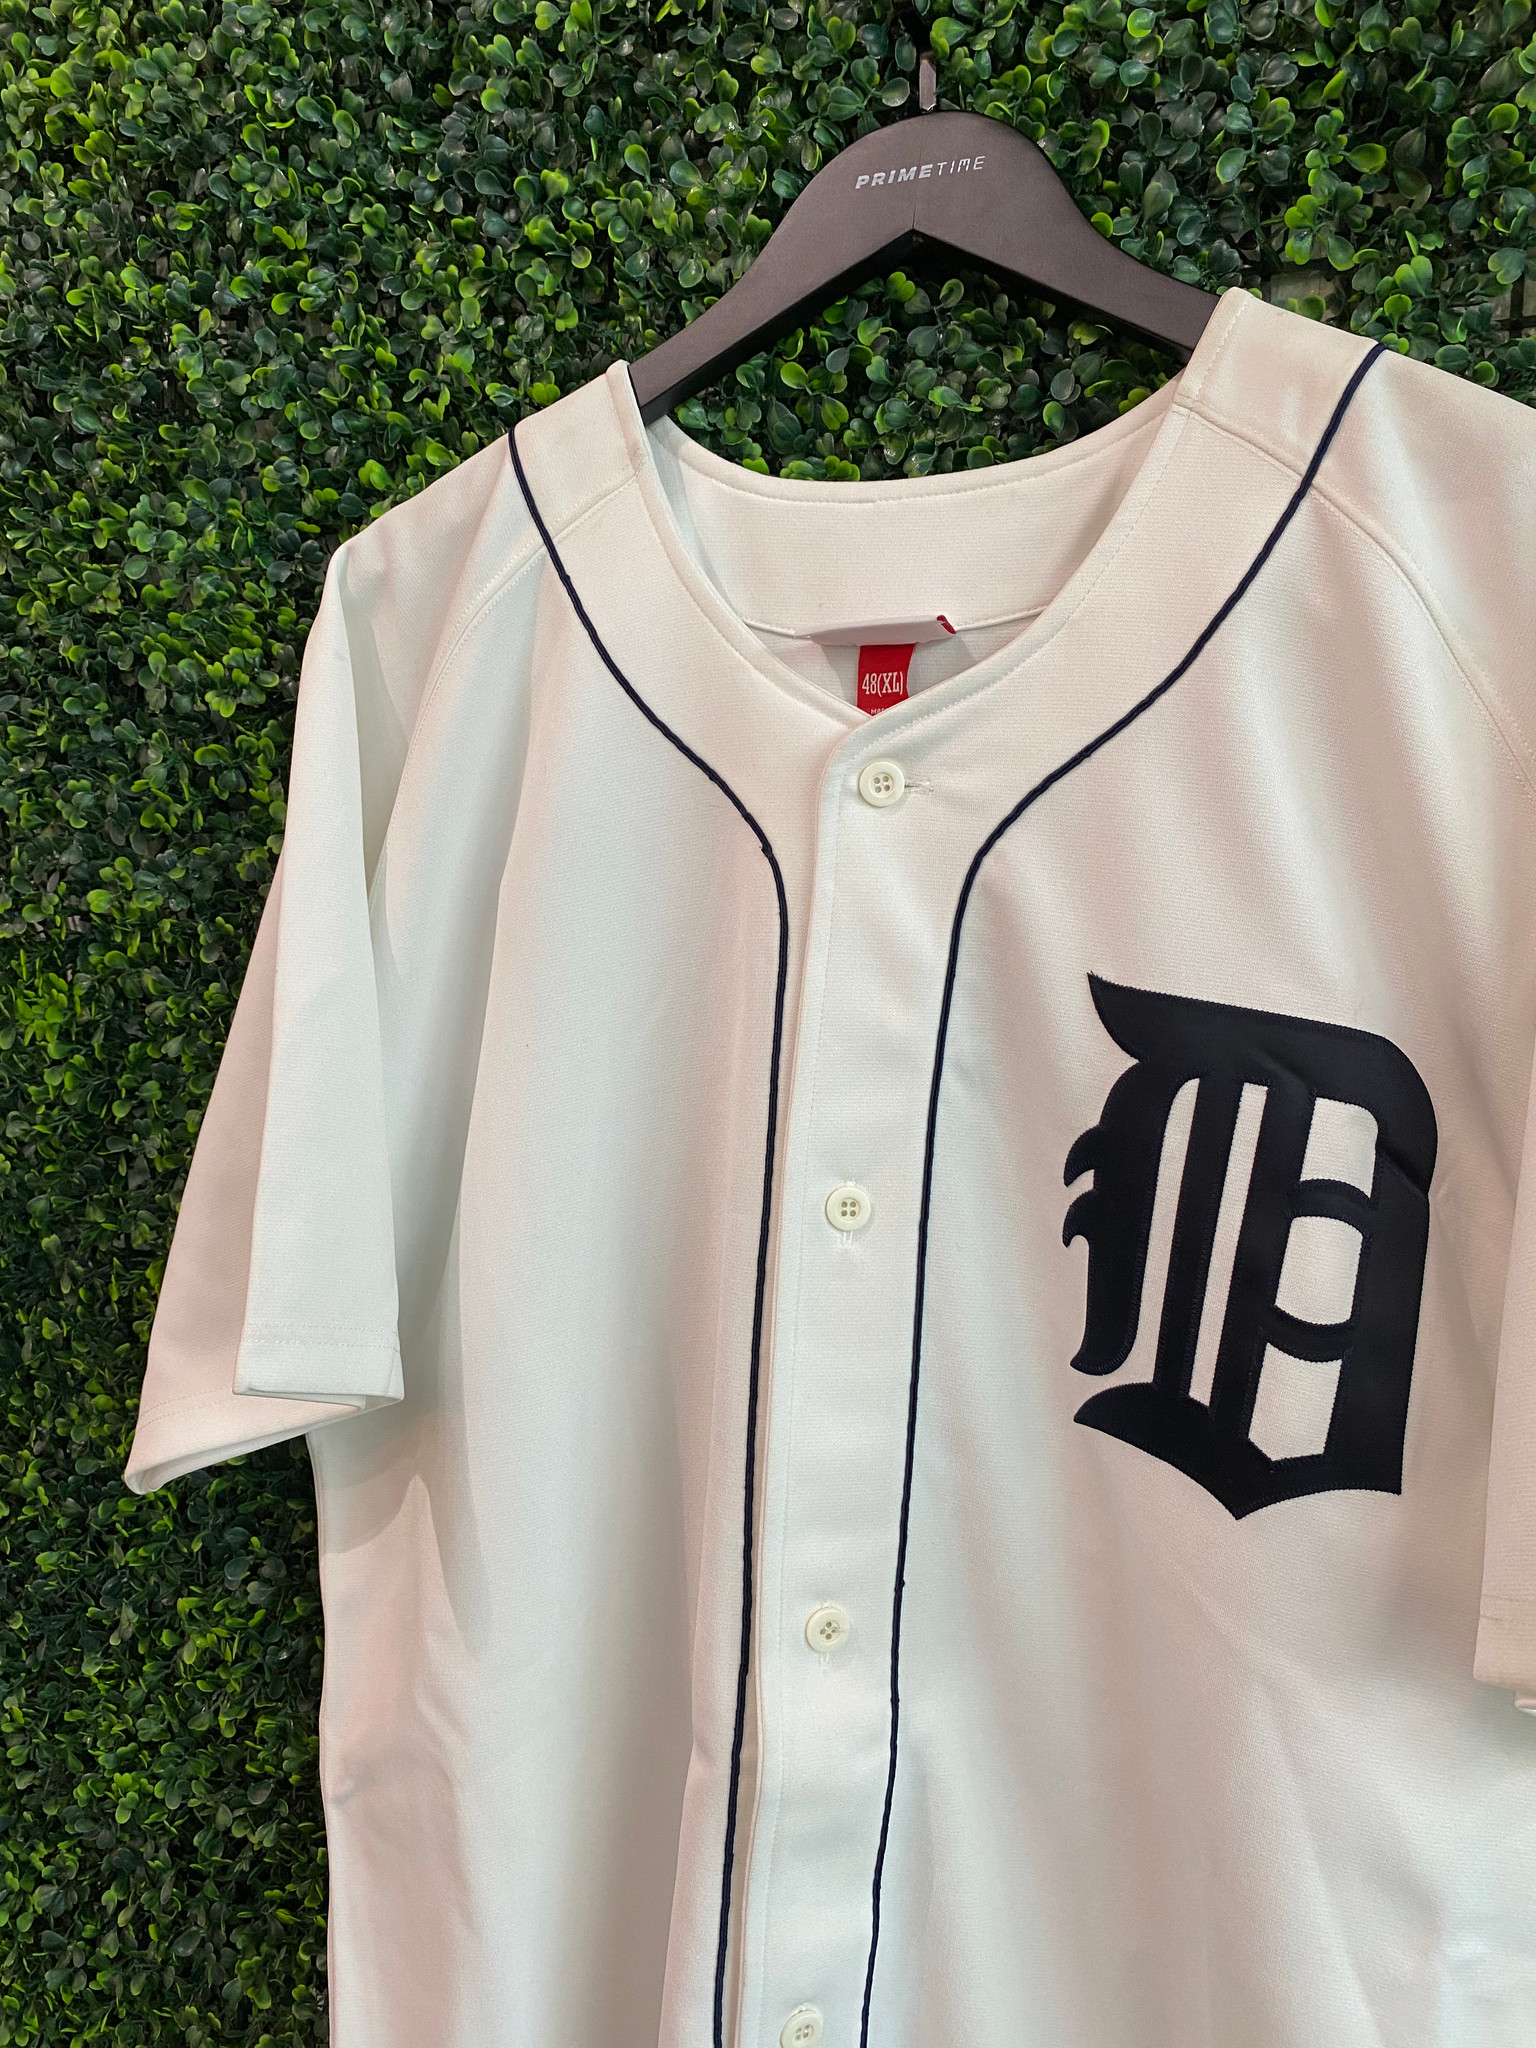 BRAND NEW KIRK GIBSON DETROIT TIGERS AUTHENTIC MITCHELL & NESS